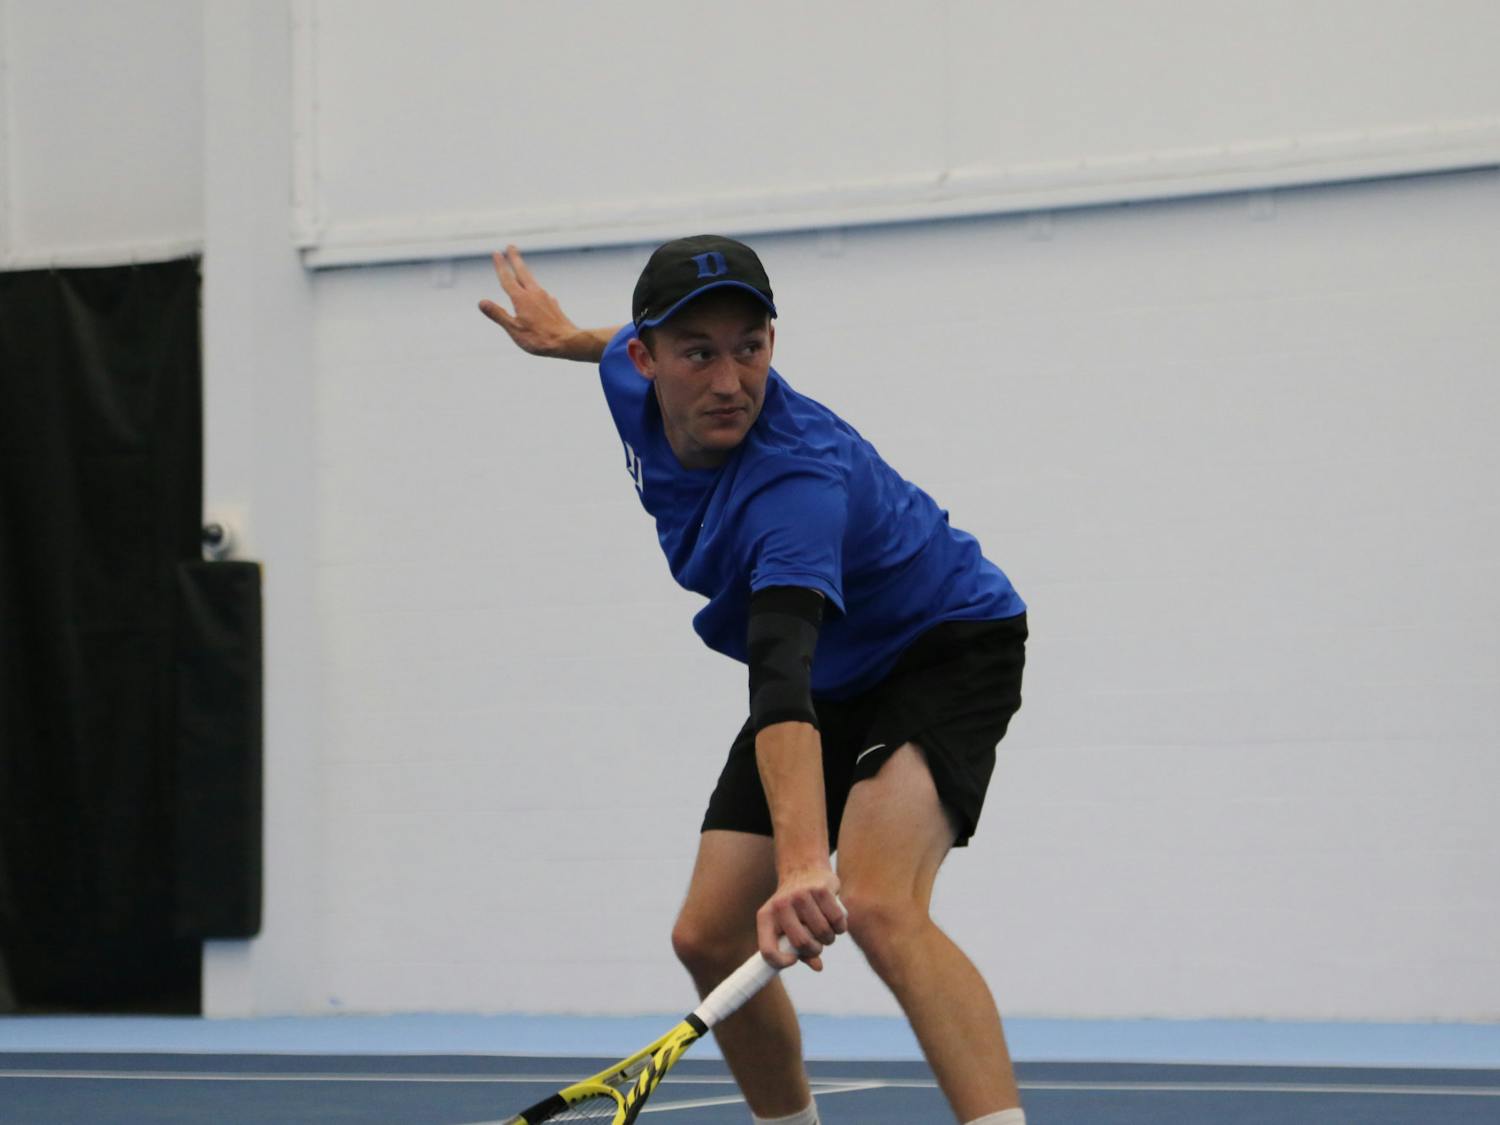 Andrew Dale prevailed 6-4, 4-6, 6-4 for Duke in the decisive singles match on court five Saturday.